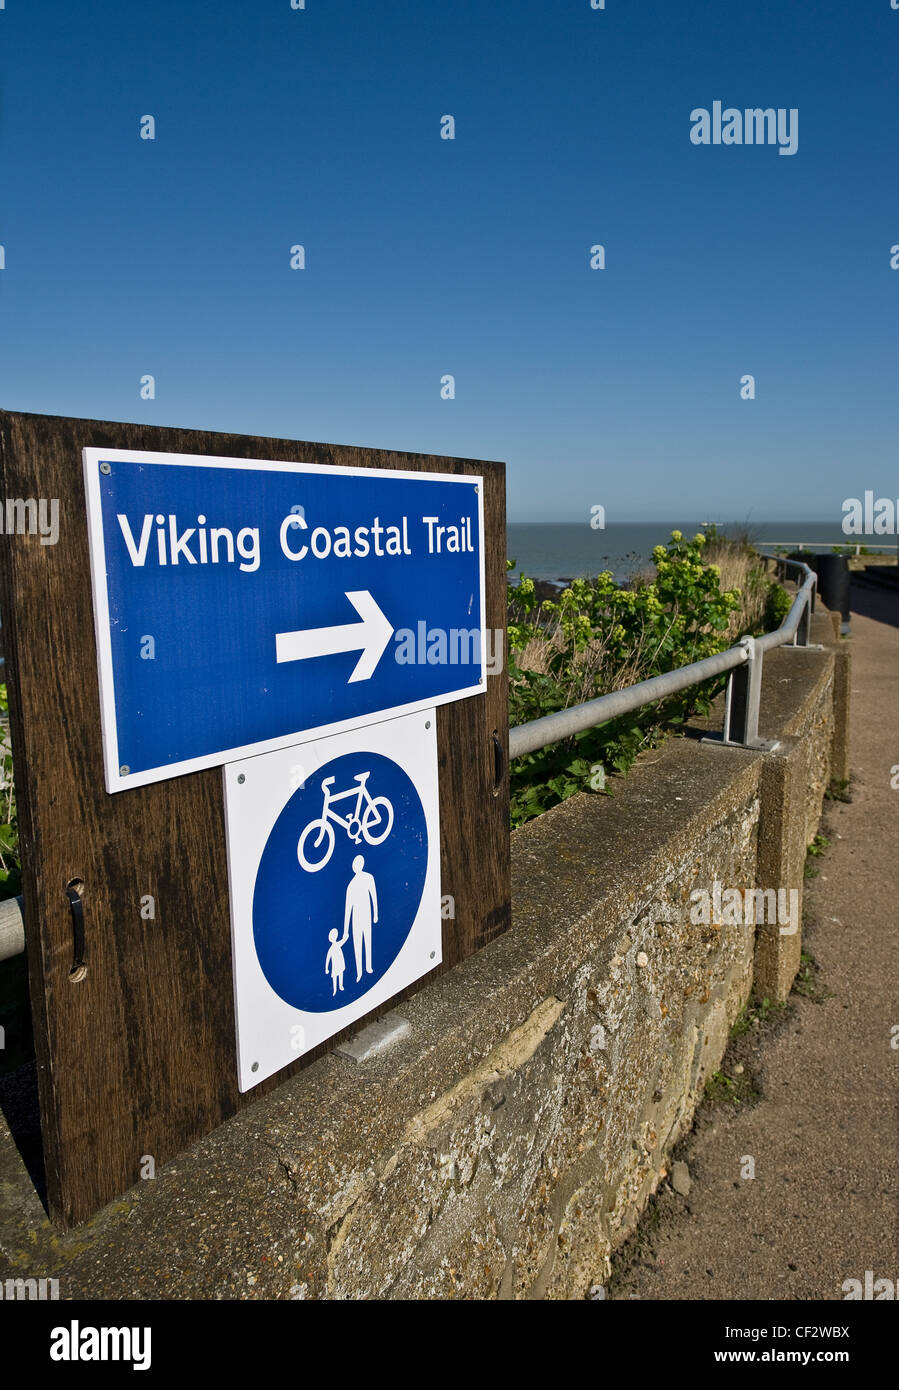 A sign indicating the Viking Coastal Trail in Margate. Stock Photo